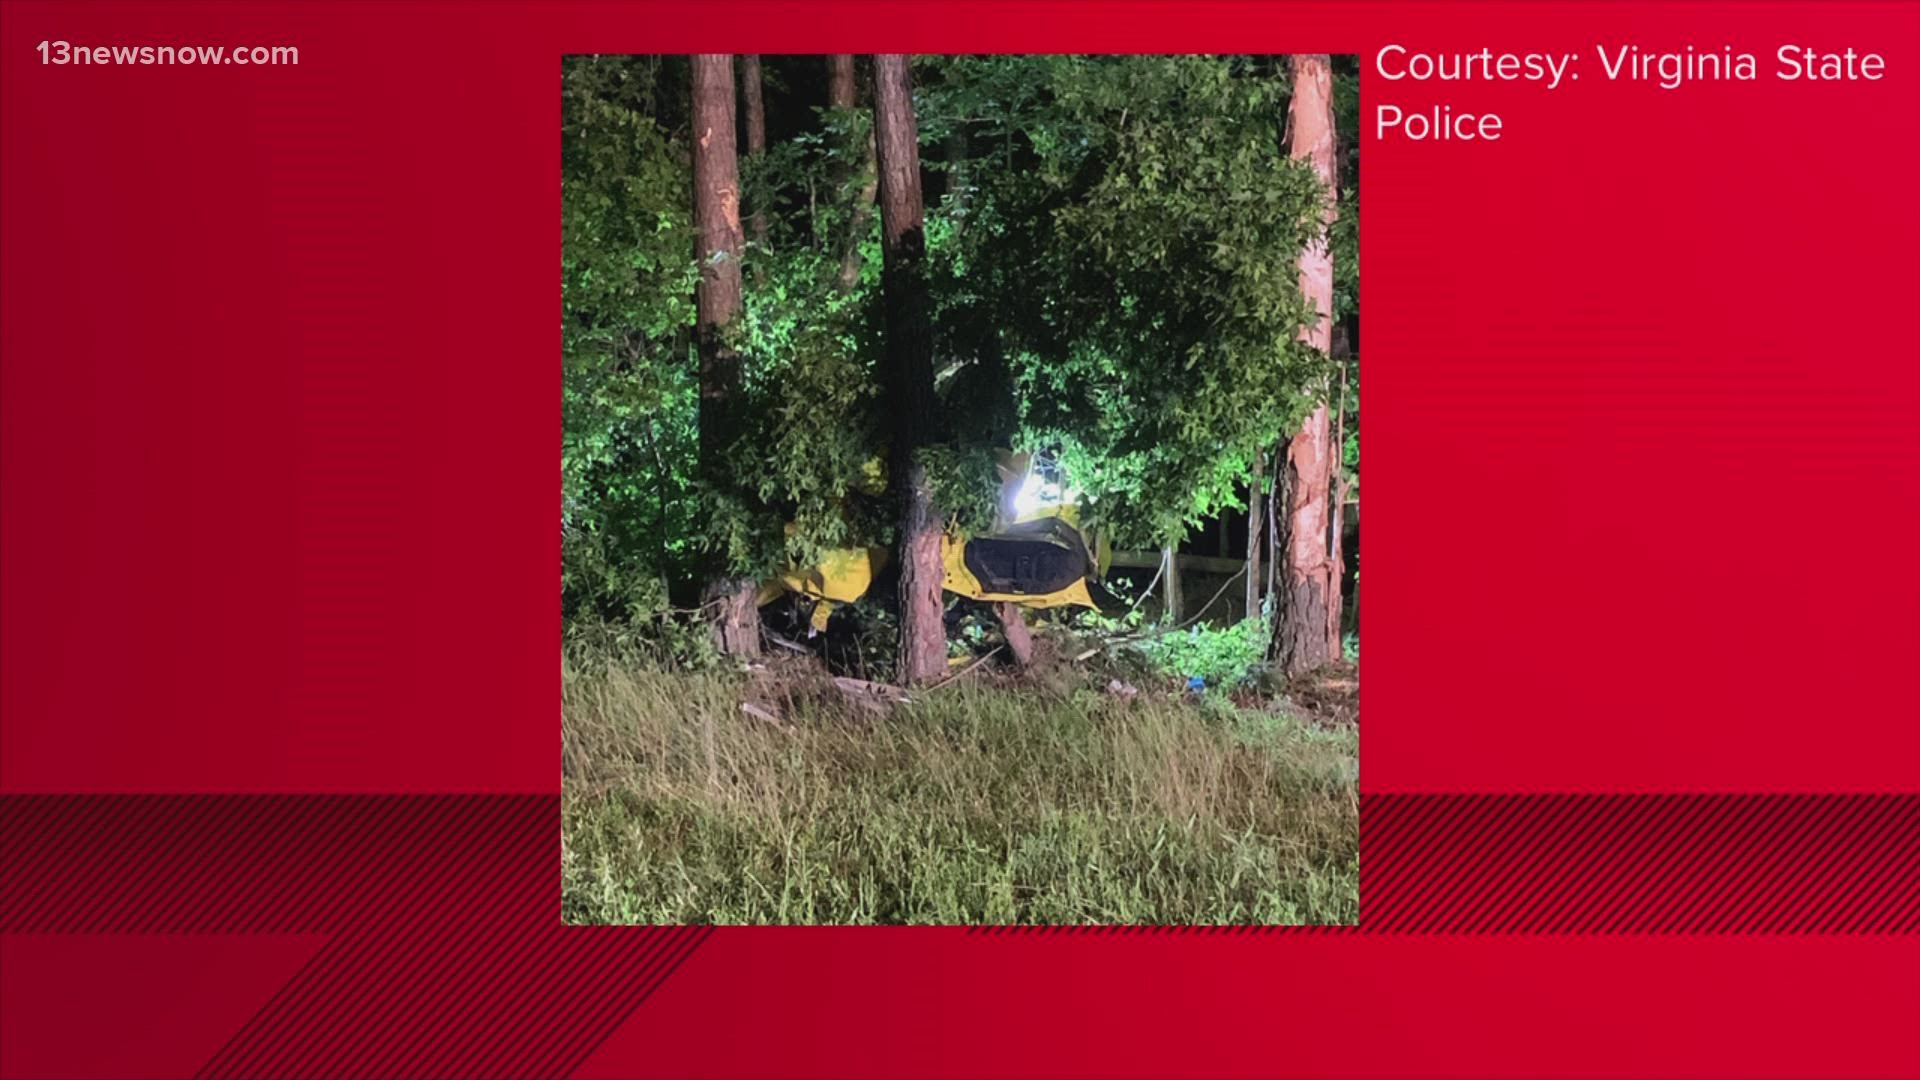 The vehicle ran off the roadway and hit a tree.